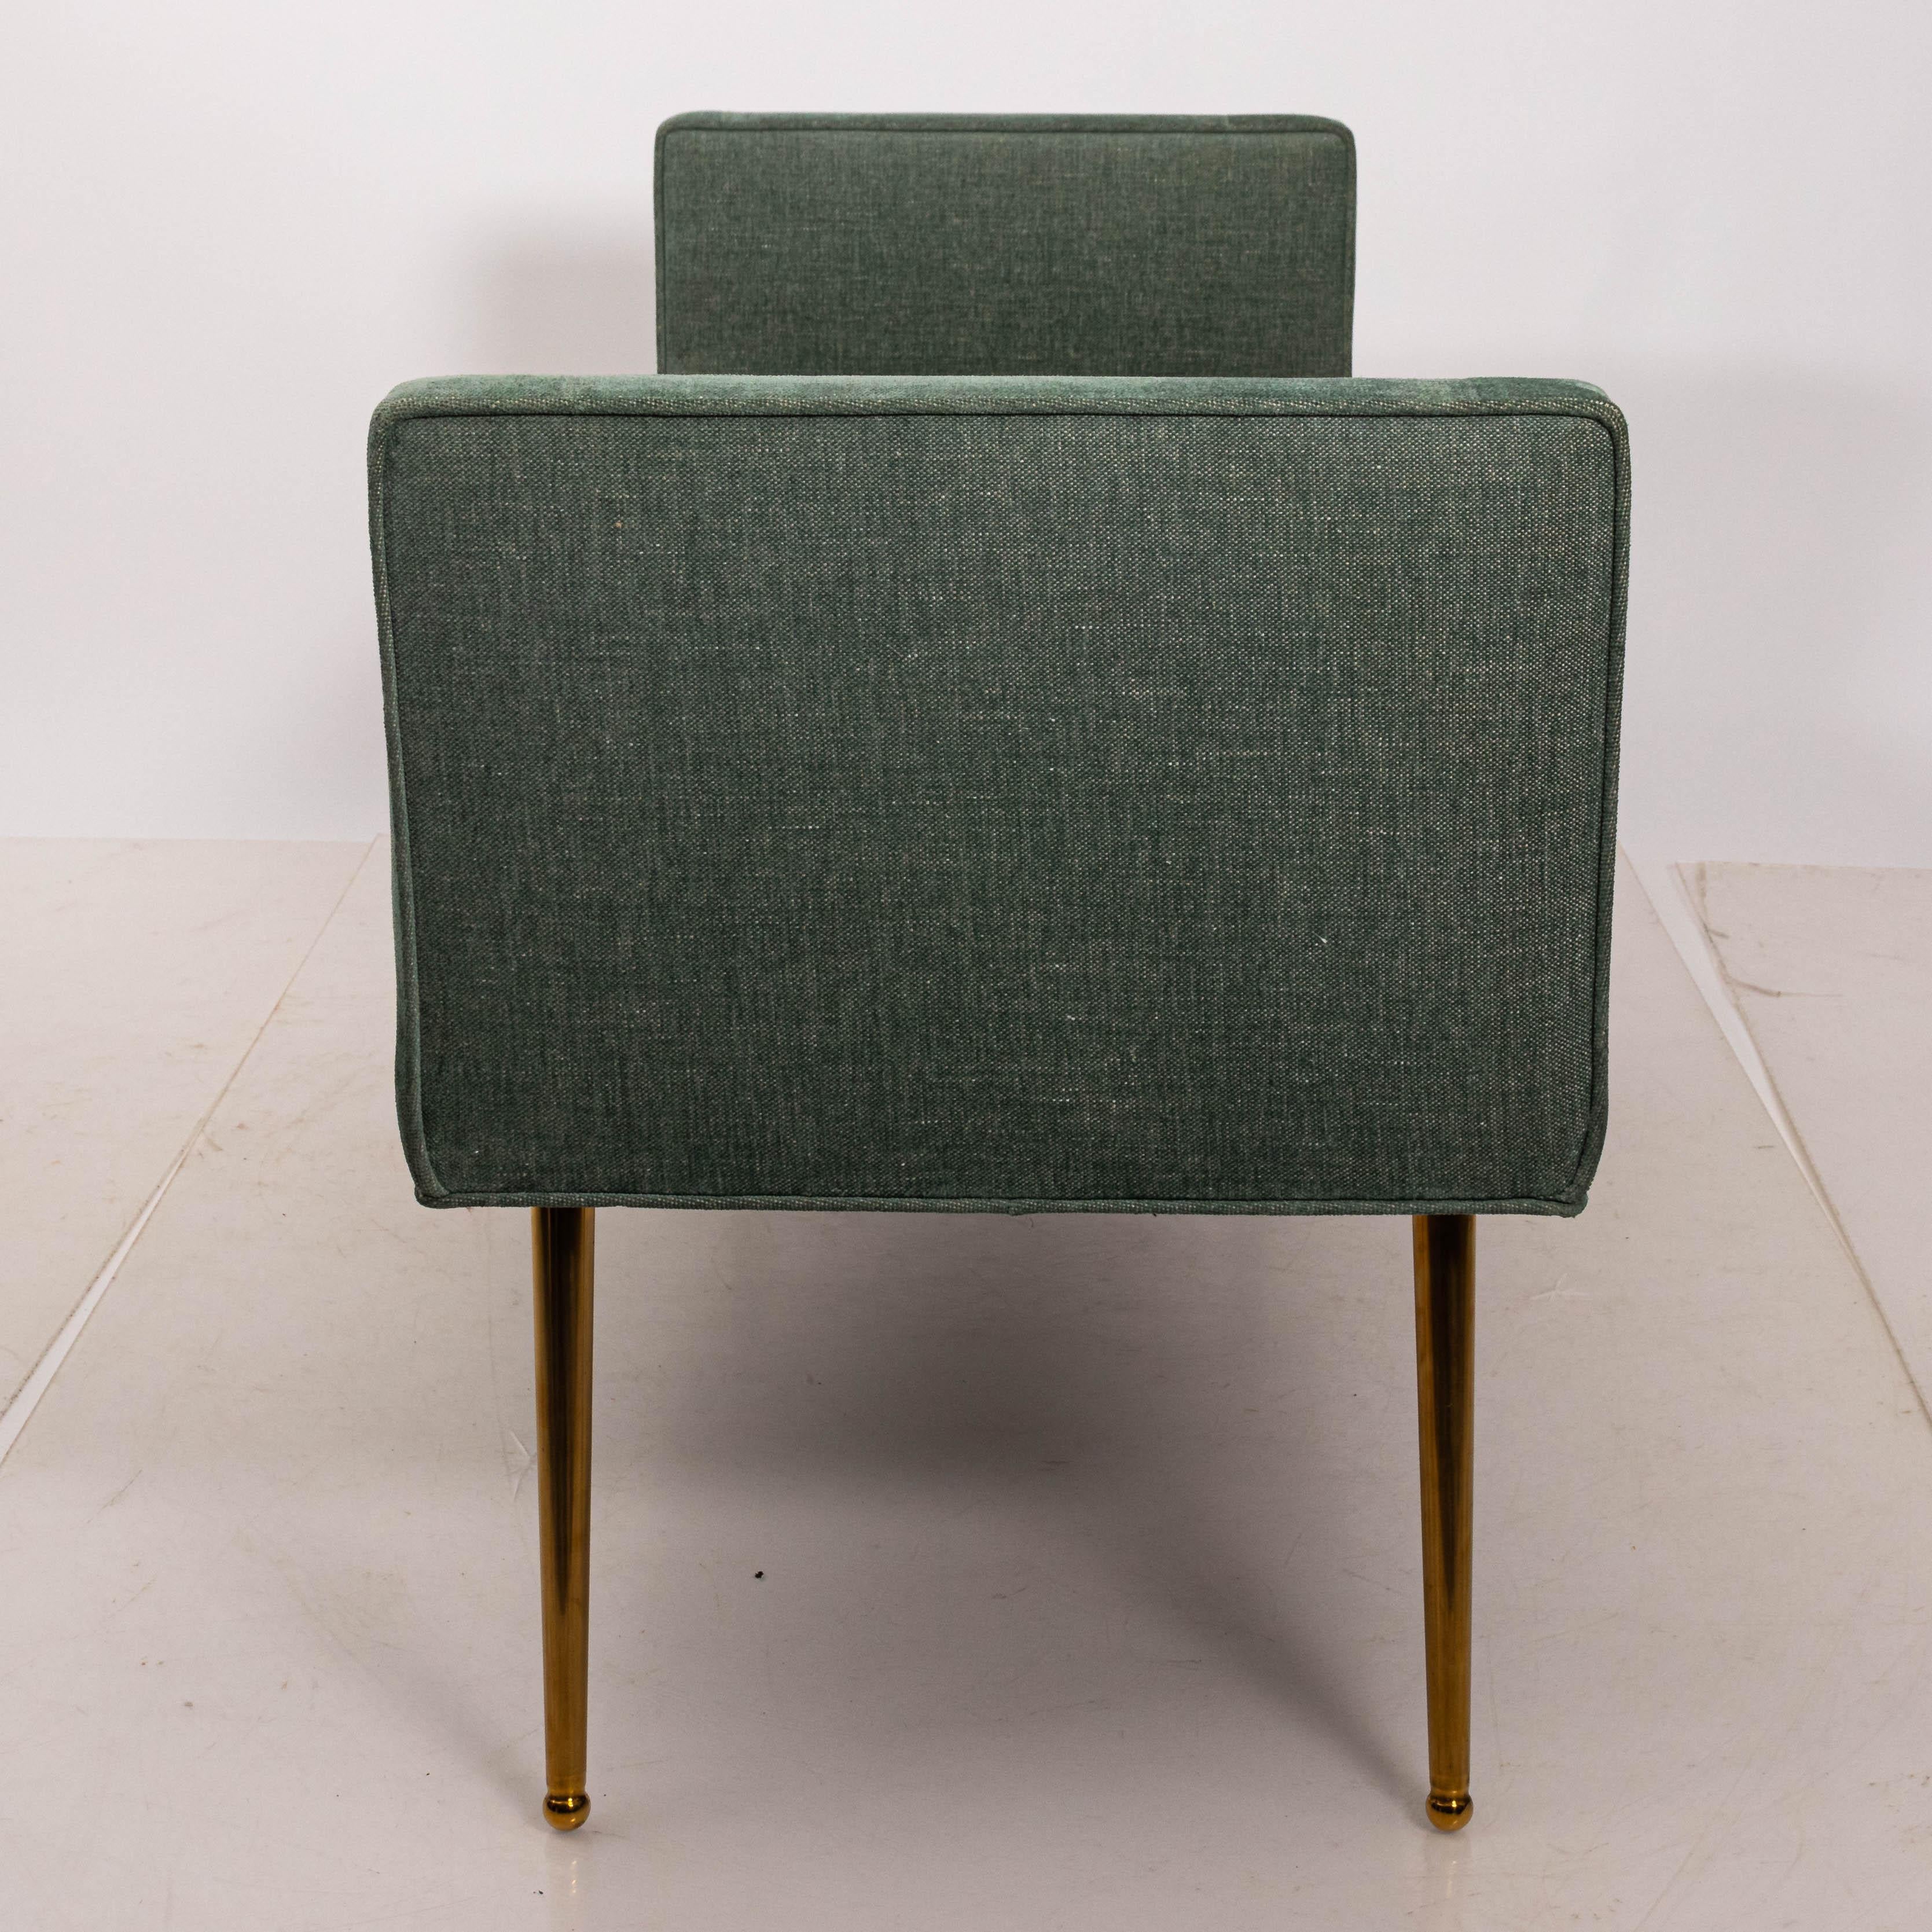 American Midcentury Style Upholstered Armed Bench For Sale